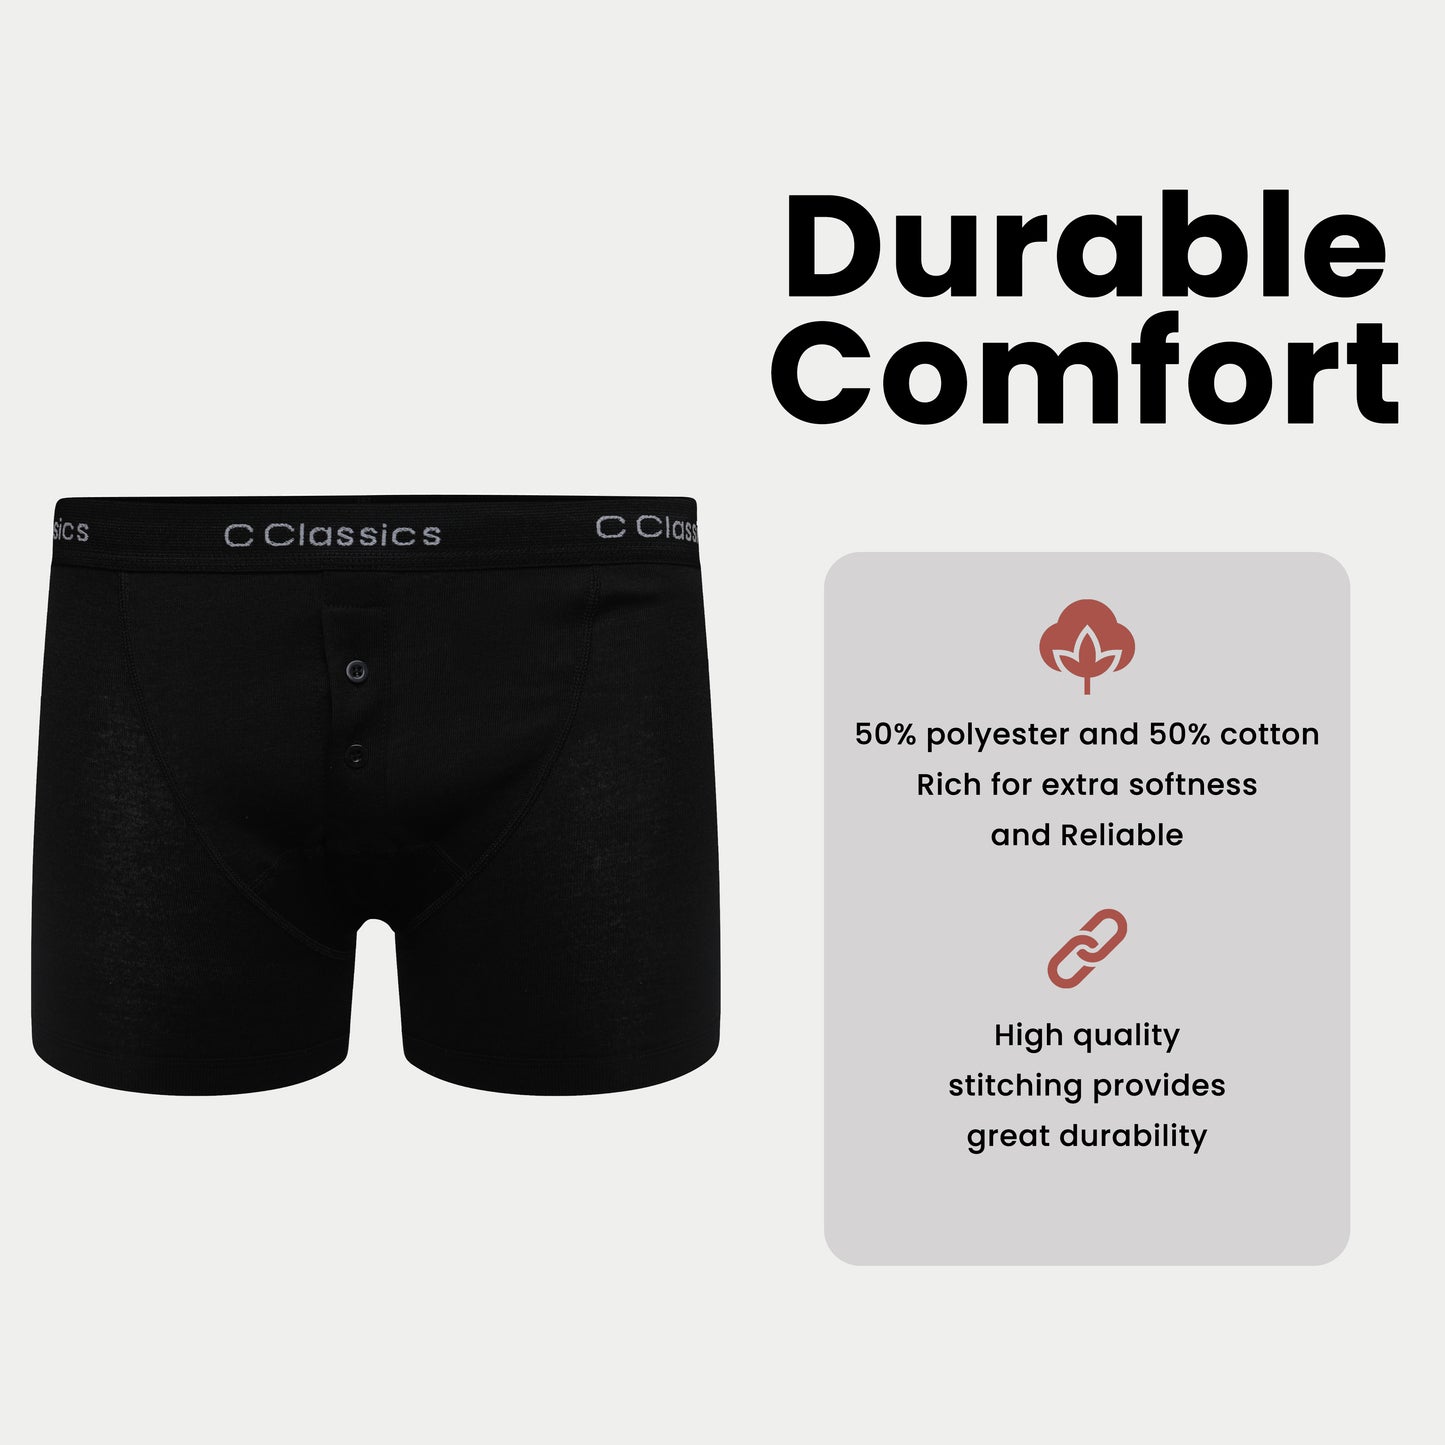 6 Pairs Of Kids Black Cotton Rich Boxers Shorts Button Fly, Classic Design Boys Boxer Underwear Elasticated, Breathable Stretchable Material